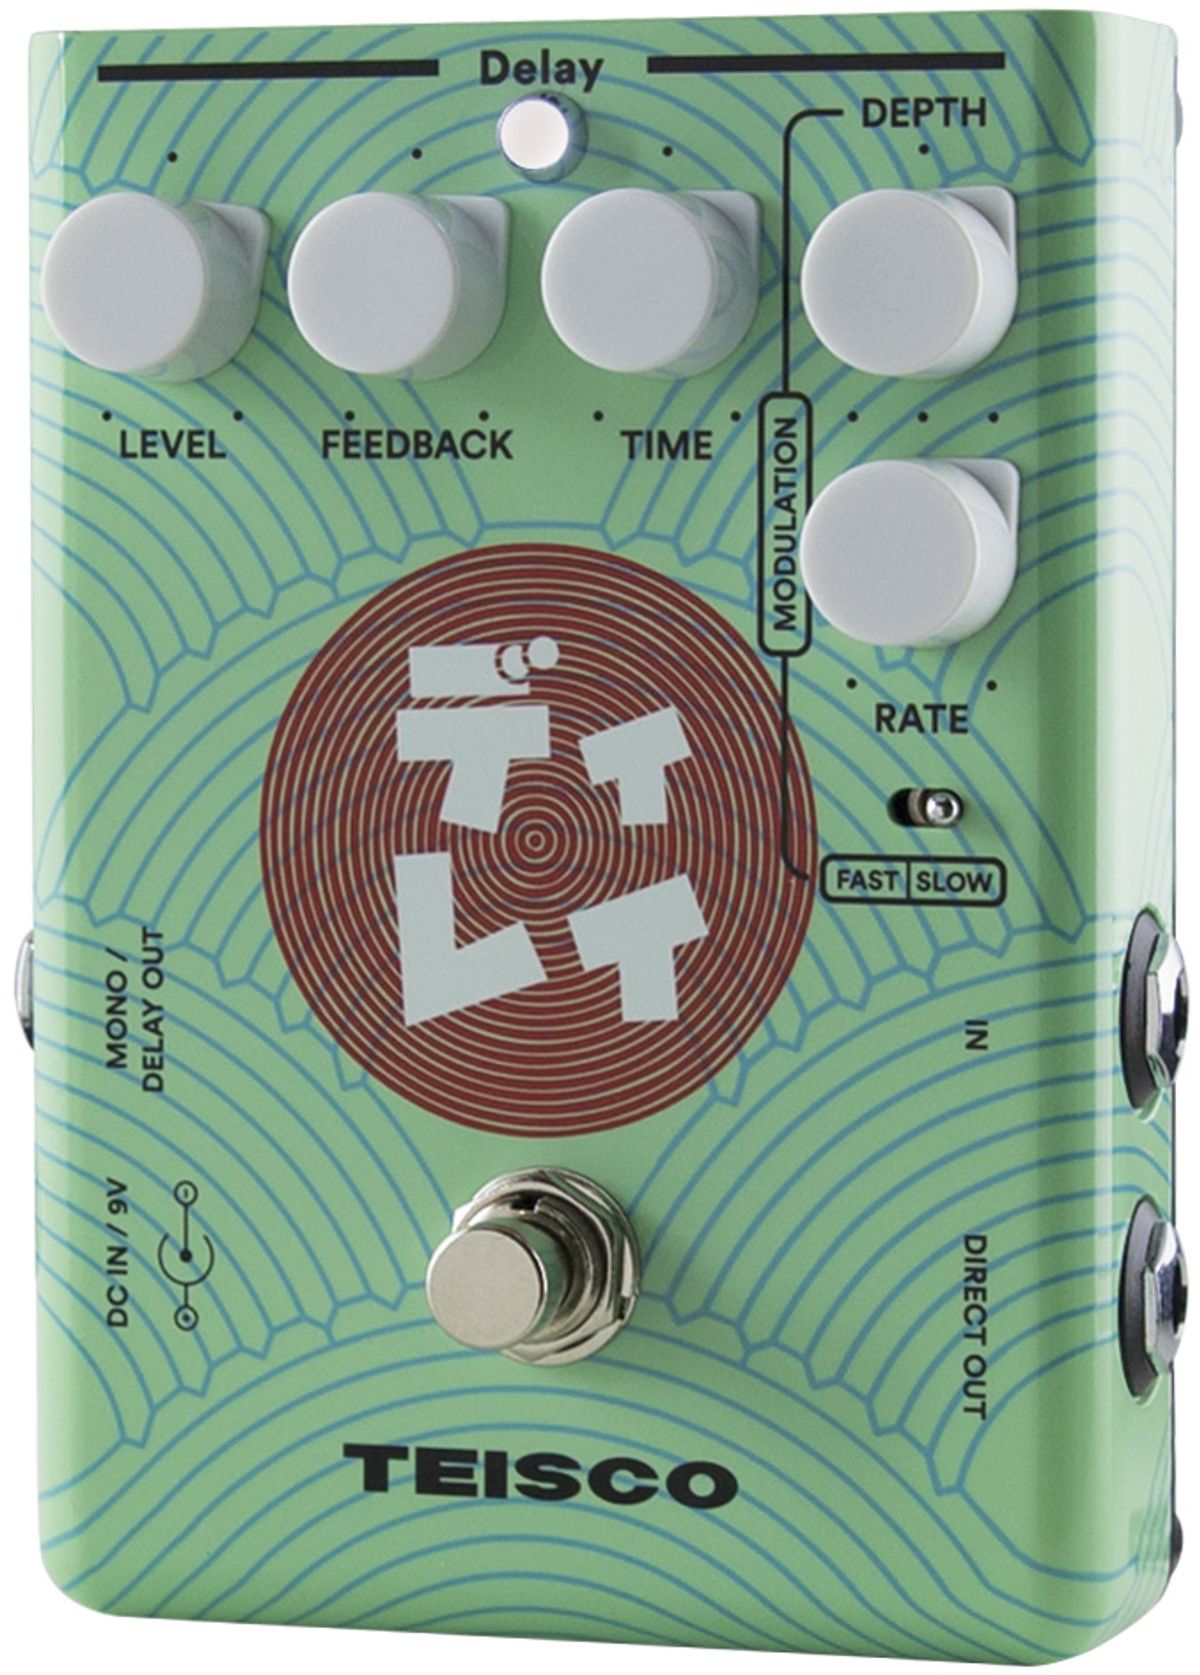 Teisco Delay Review